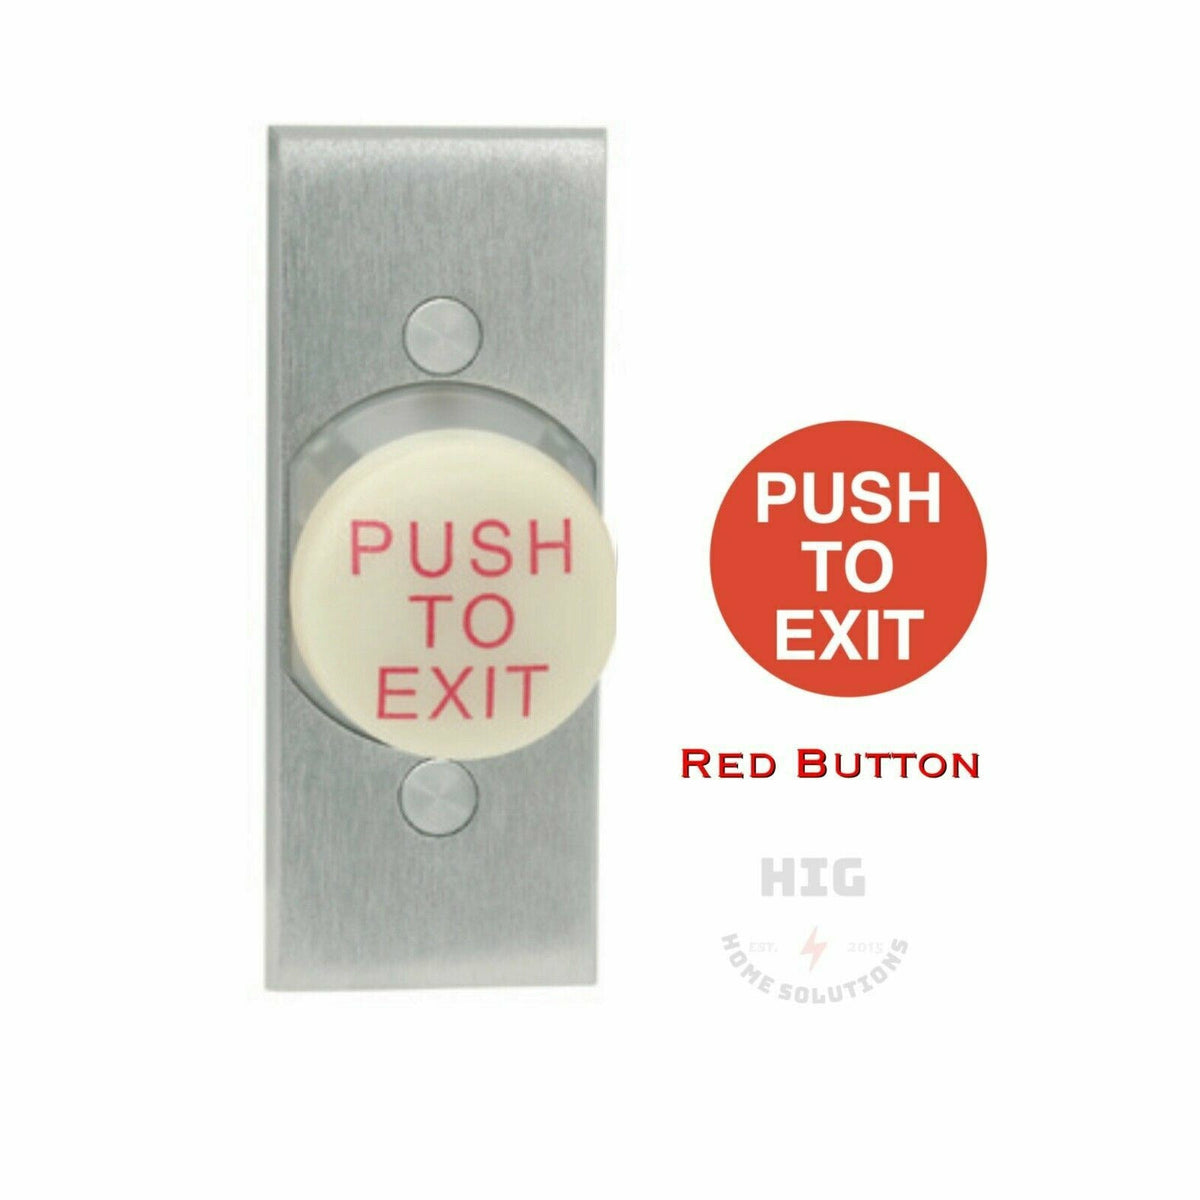 Schlage Mushroom Button, Narrow Style, Red, “PUSH TO EXIT”, Delayed Action - Designer Entryway 